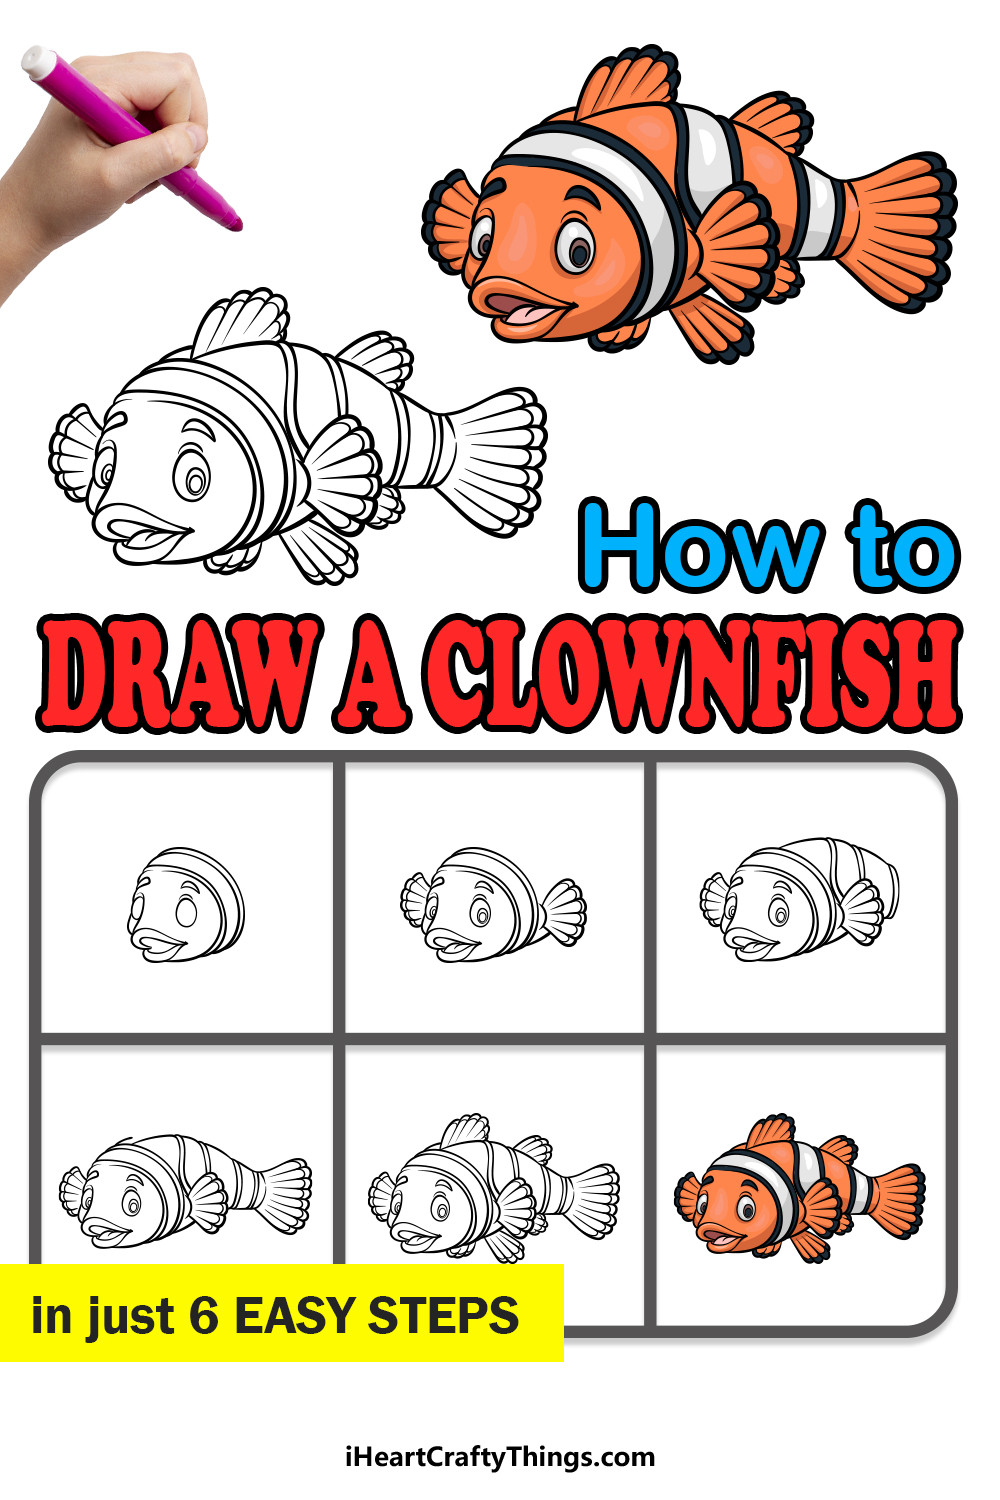 how to draw a Clownfish in 6 easy steps